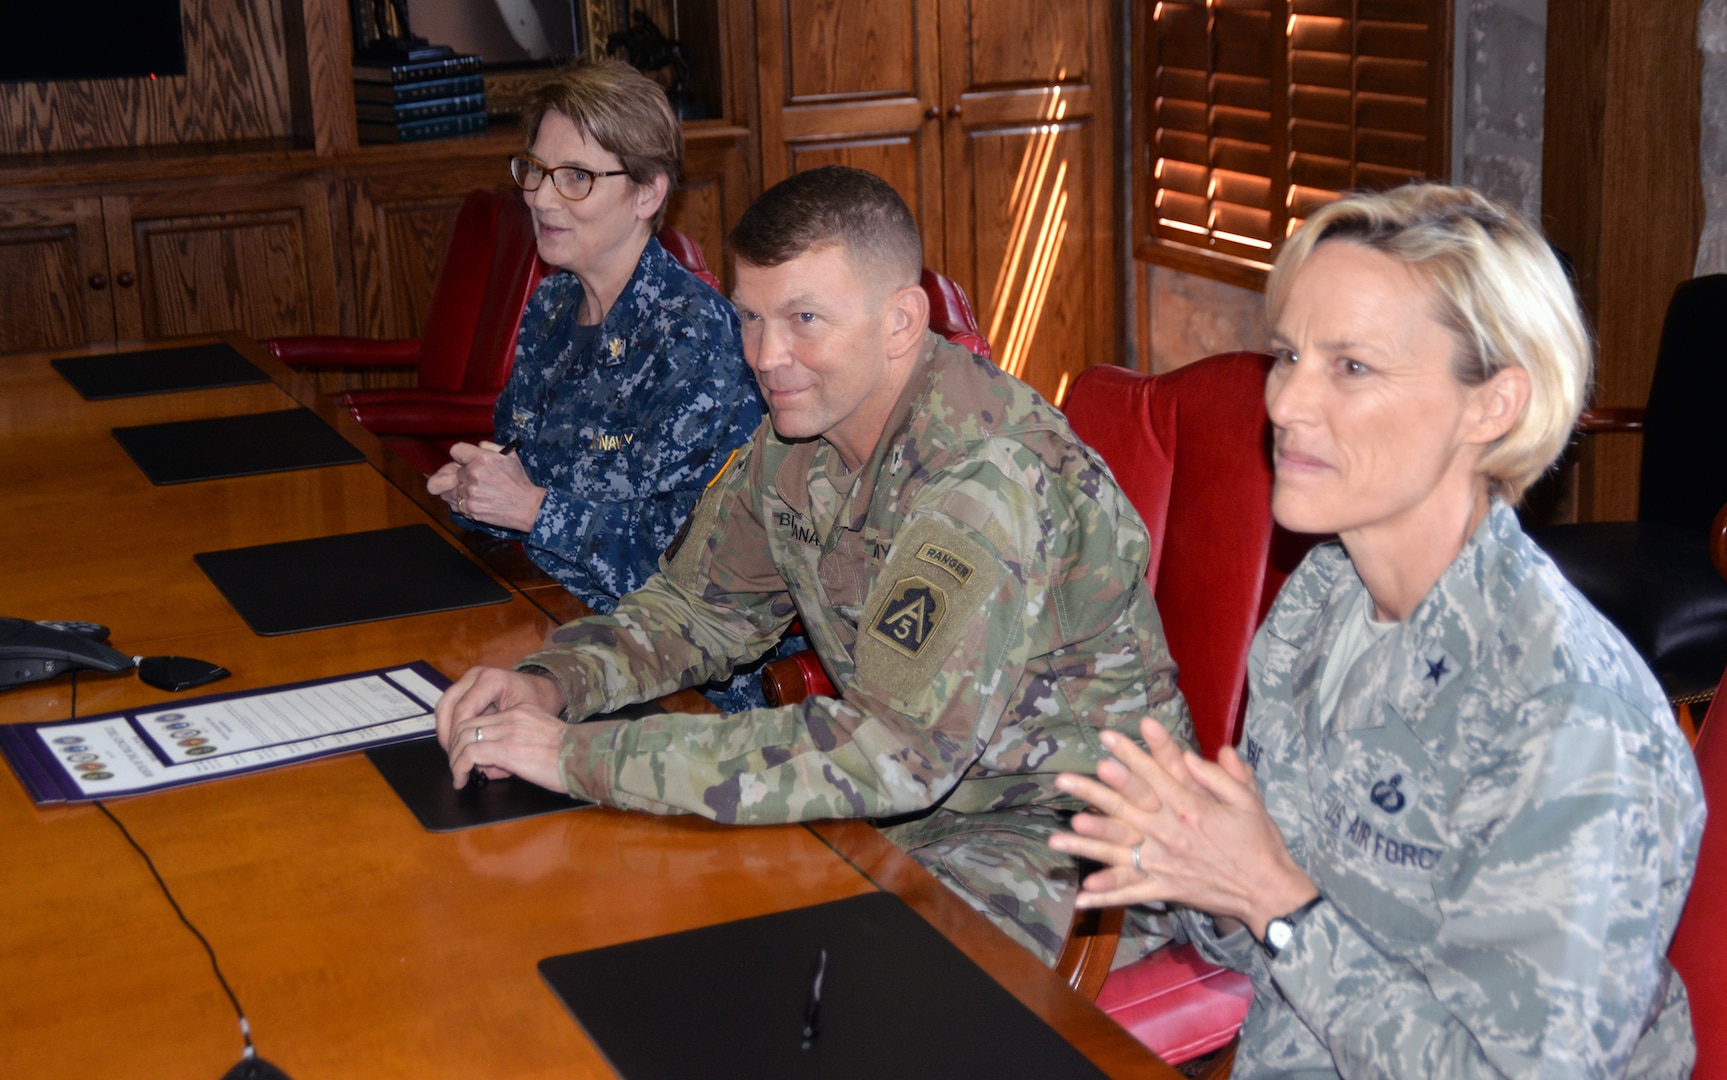 From left) Rear Adm. Rebecca McCormick-Boyle, commander, Navy Medicine Education, Training and Logistics Command; Lt. Gen. Jeffrey Buchanan, commanding general, U.S. Army North (Fifth Army); and Brig. Gen. Heather Pringle, commander, 502nd Air Base Wing and Joint Base San Antonio joined together April 12 with students, local educators and representatives from the Fort Sam Houston and Lackland Independent School Districts to recognize and honor the commitment, contributions and sacrifices children and youth make to the nation.